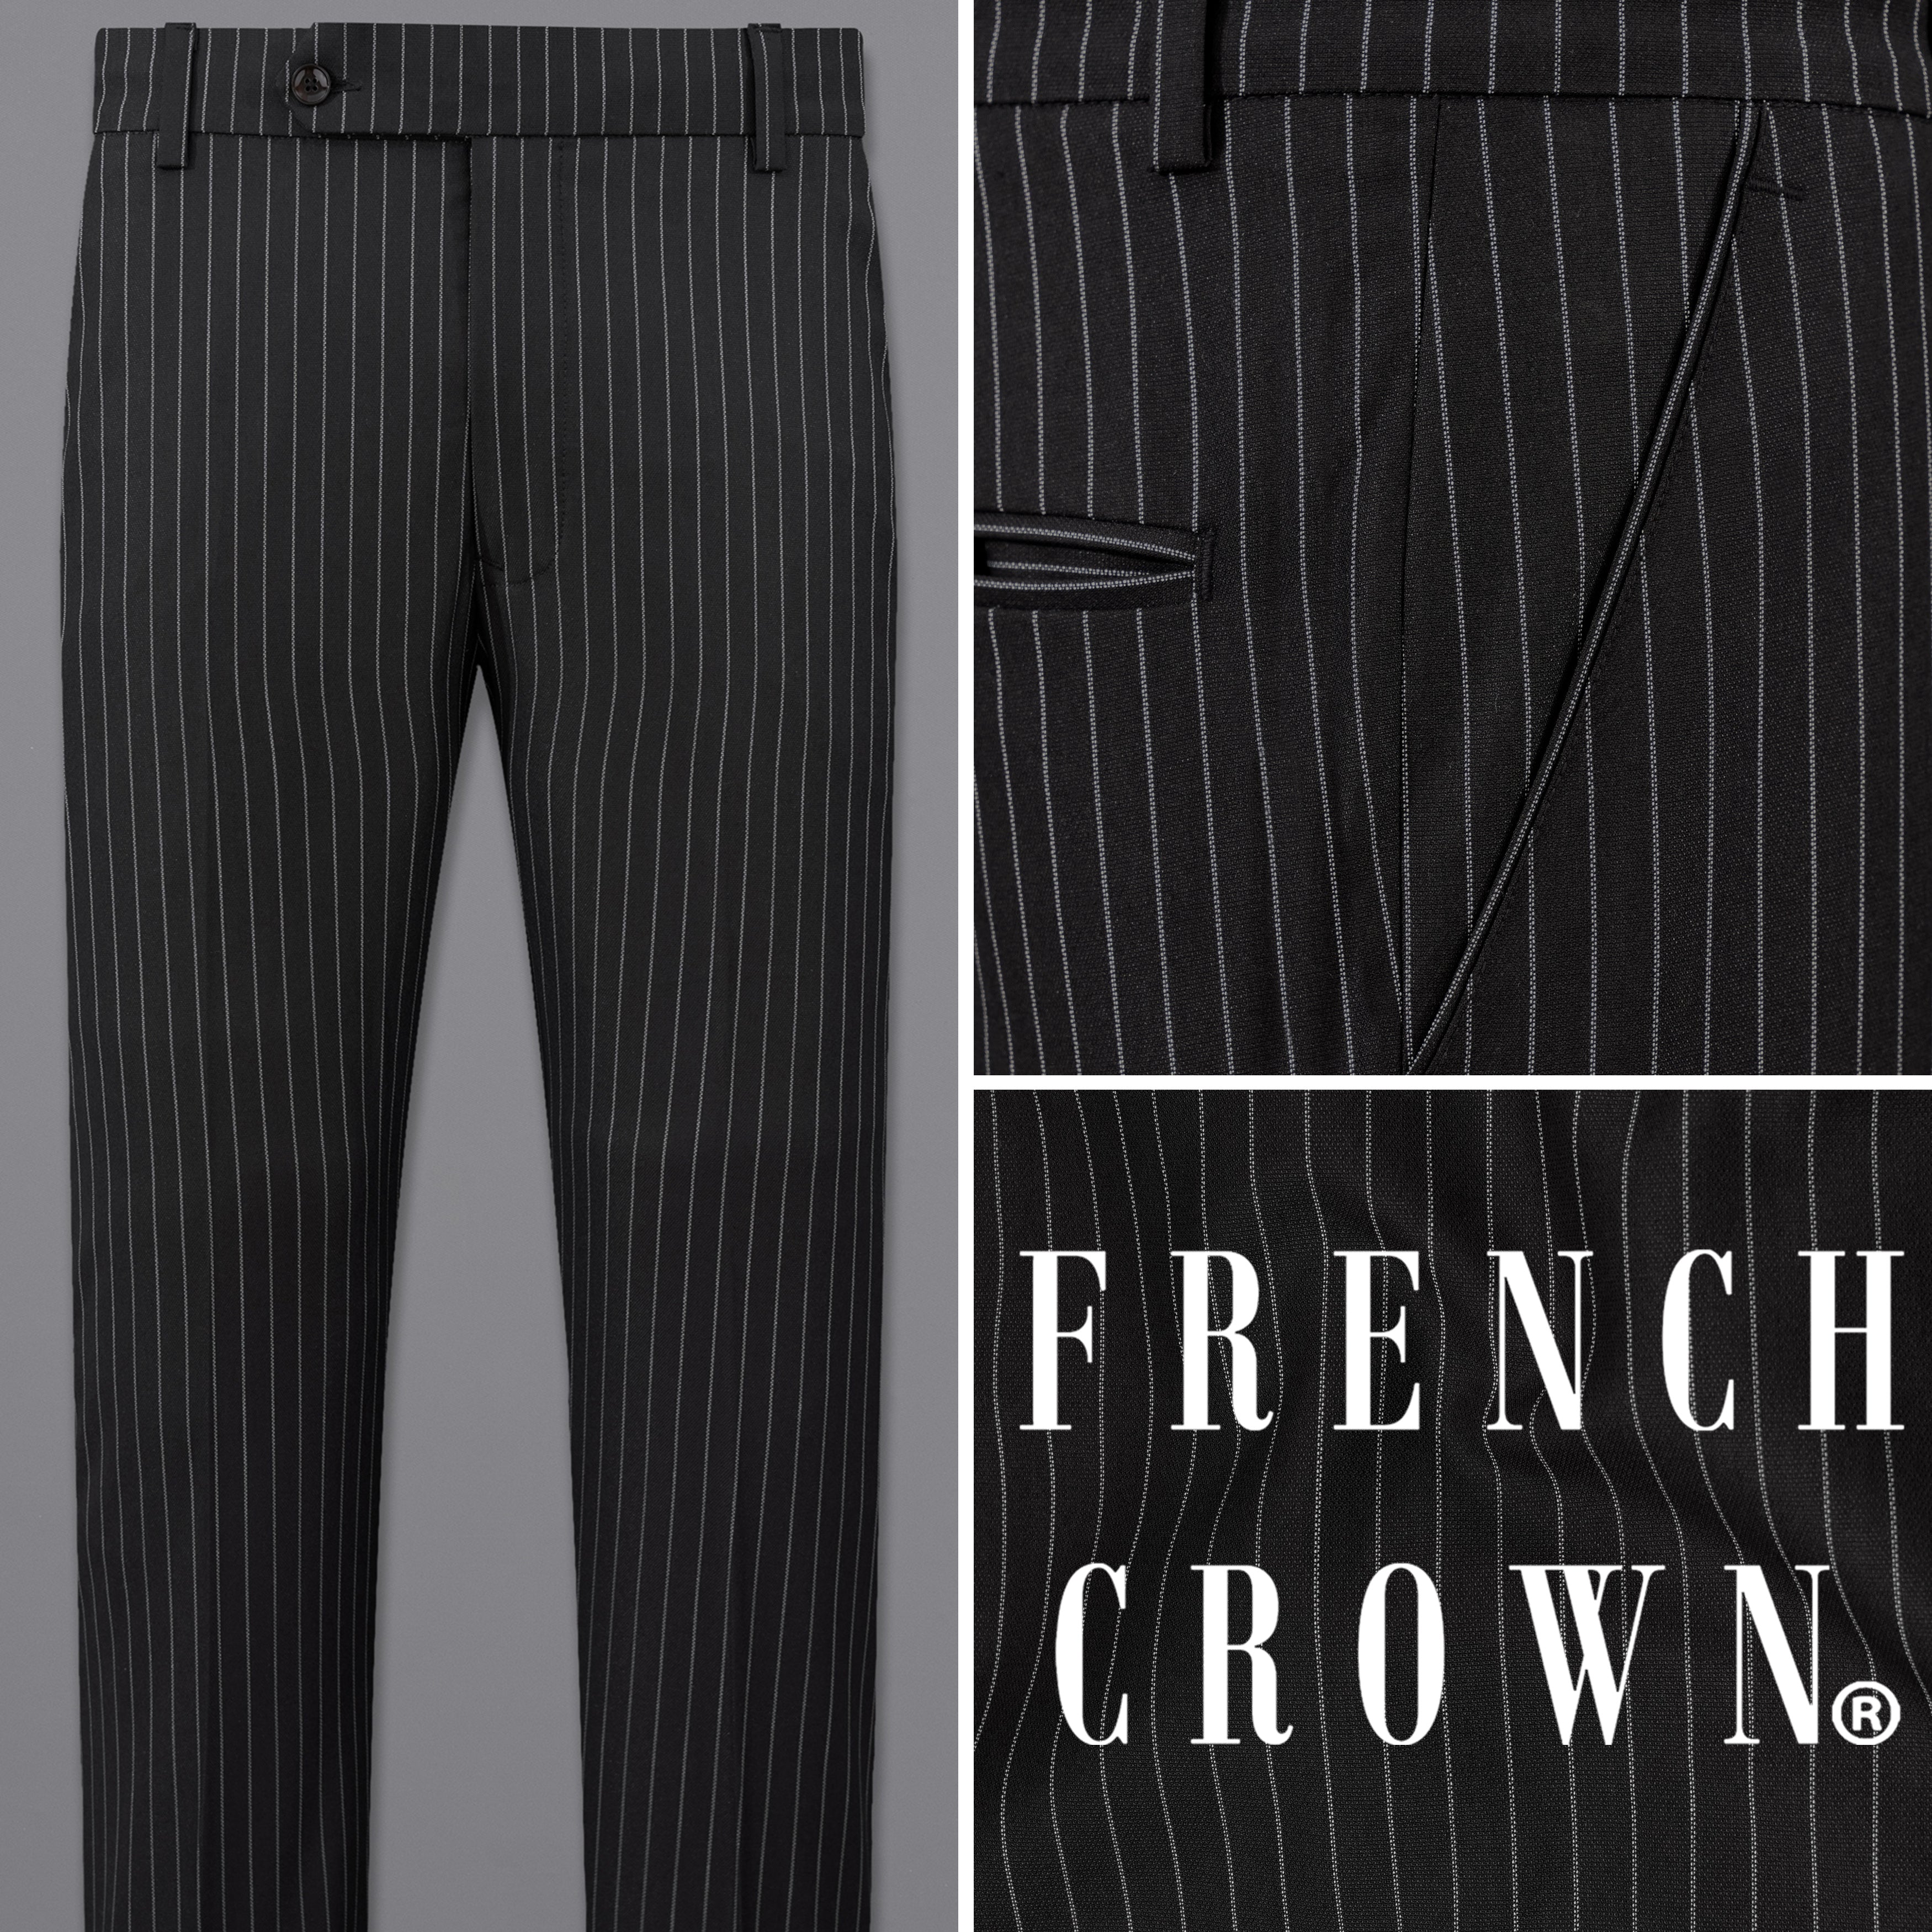 This mongoose brown tailored pant... - French Crown Luxury | Facebook